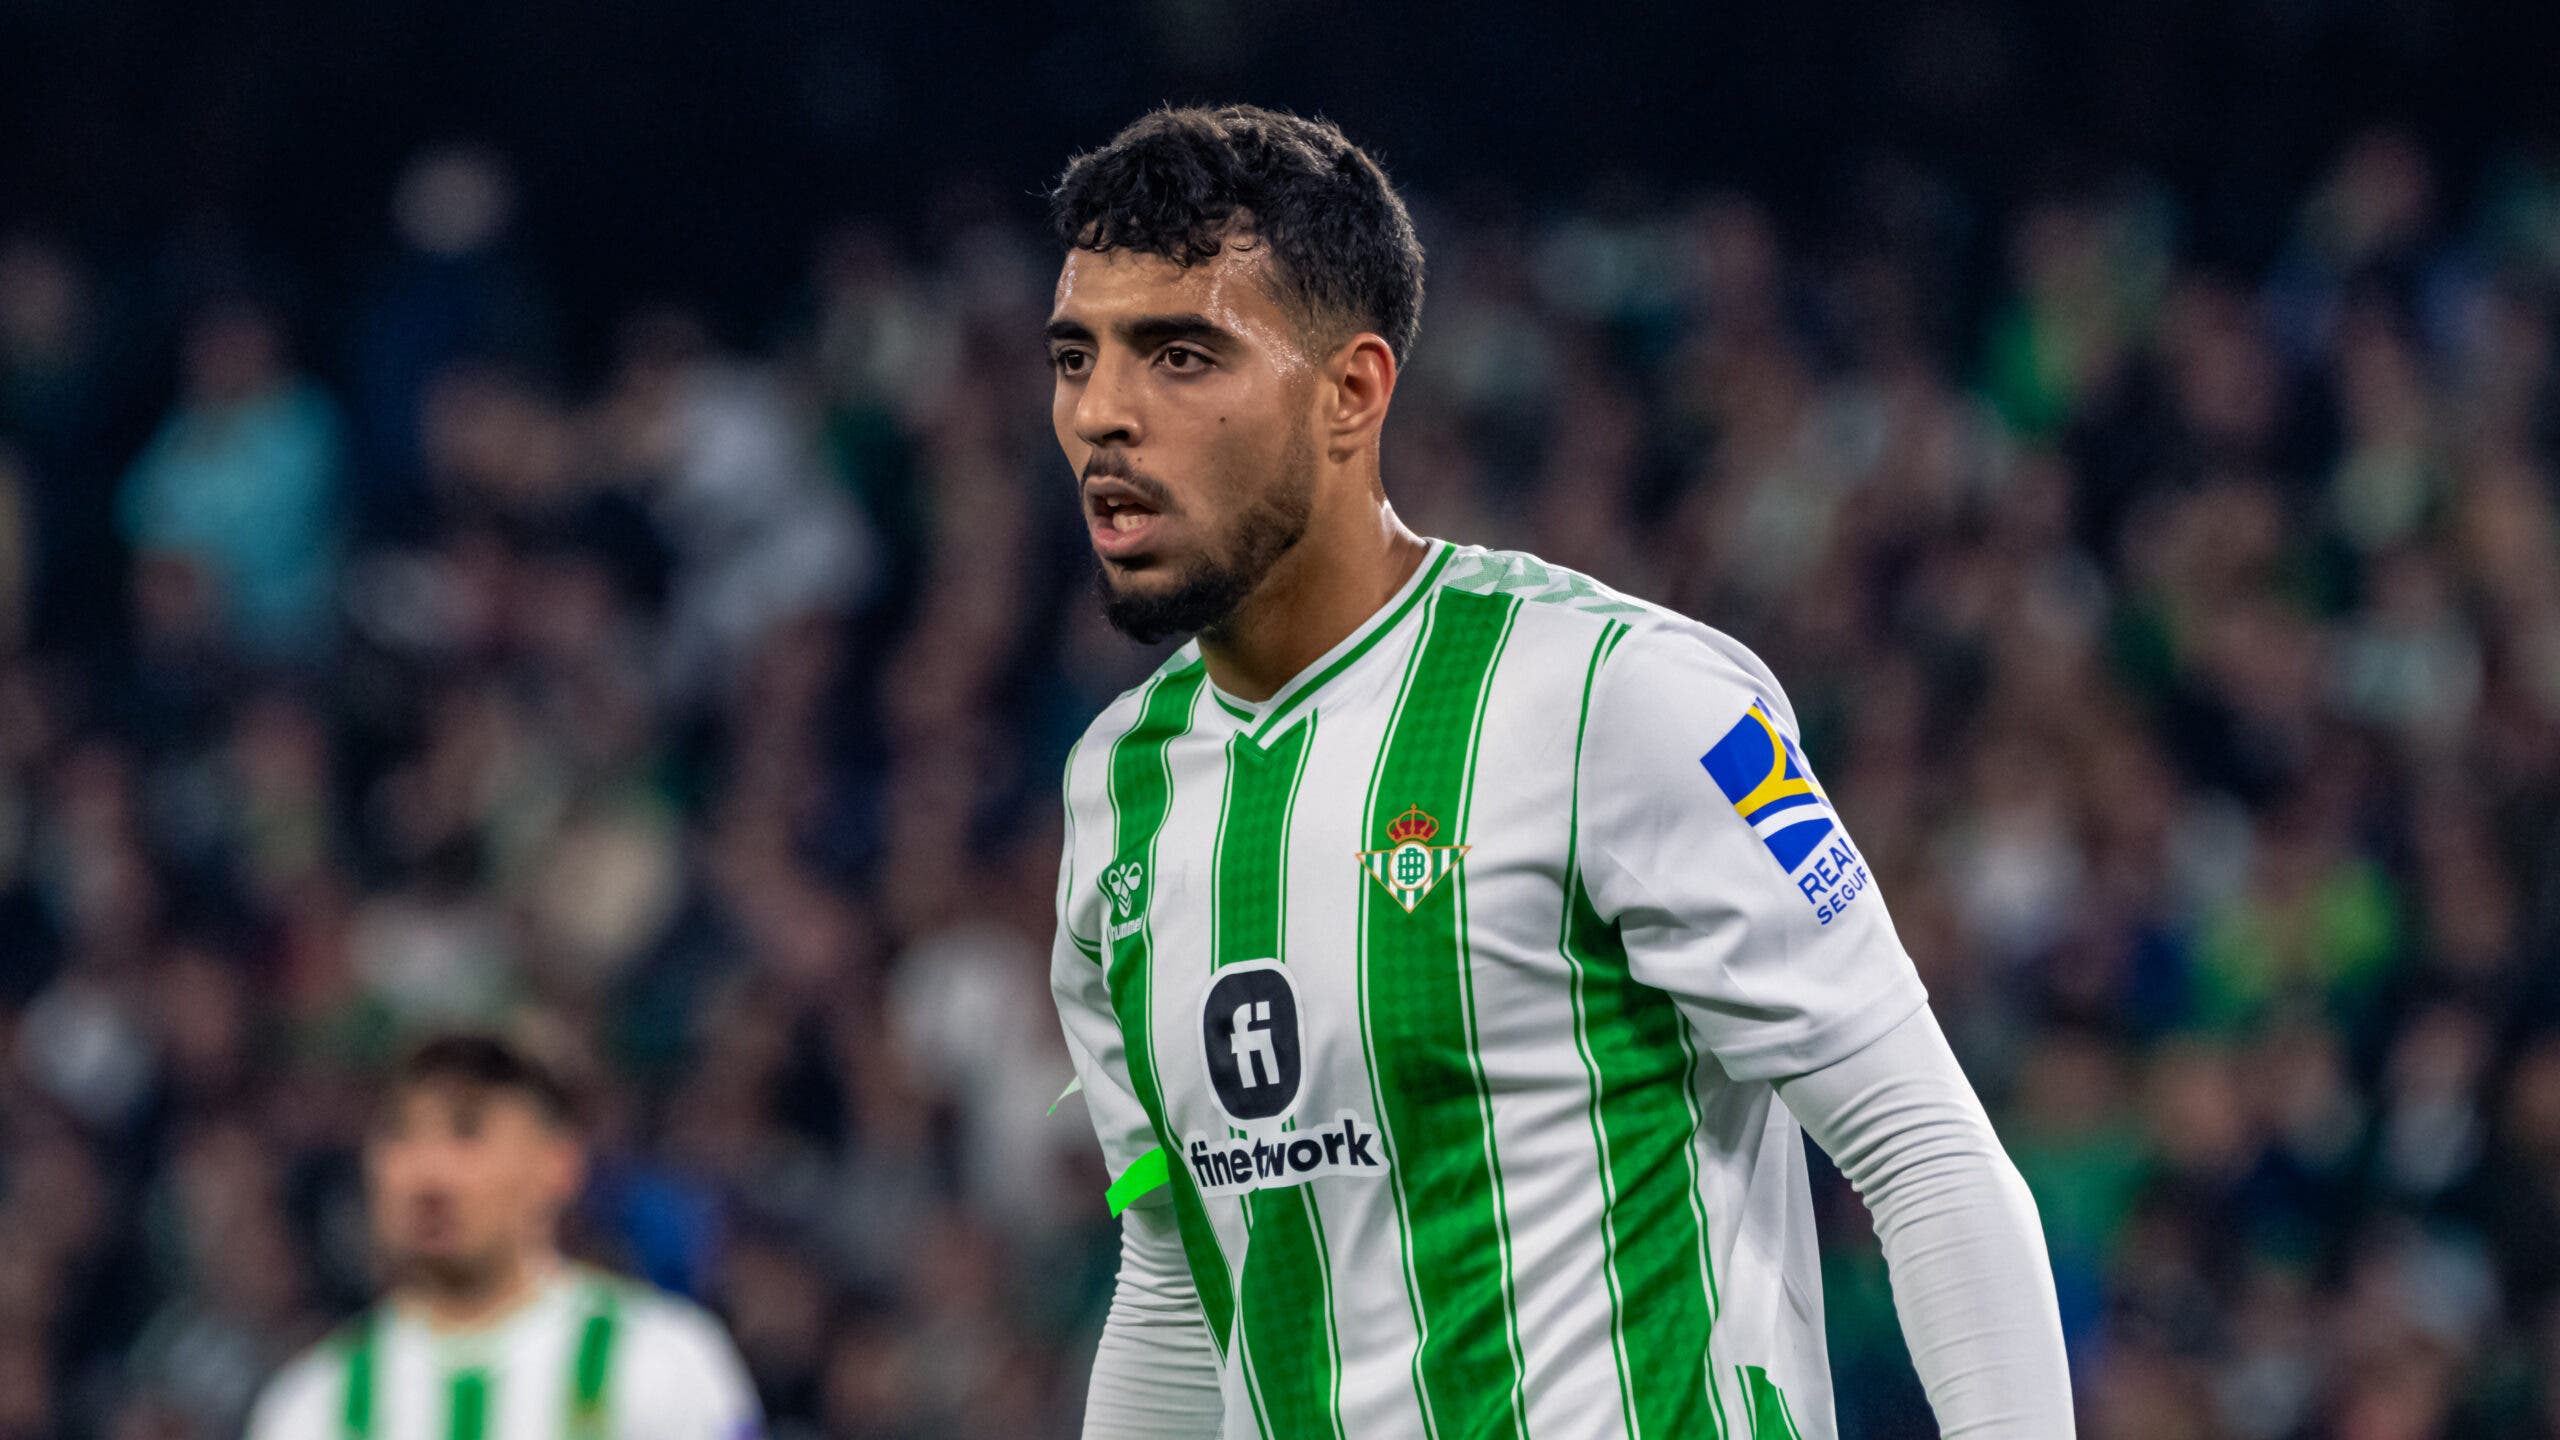 FC Barcelona cannot meet Betis because of Chadi Riad
	

